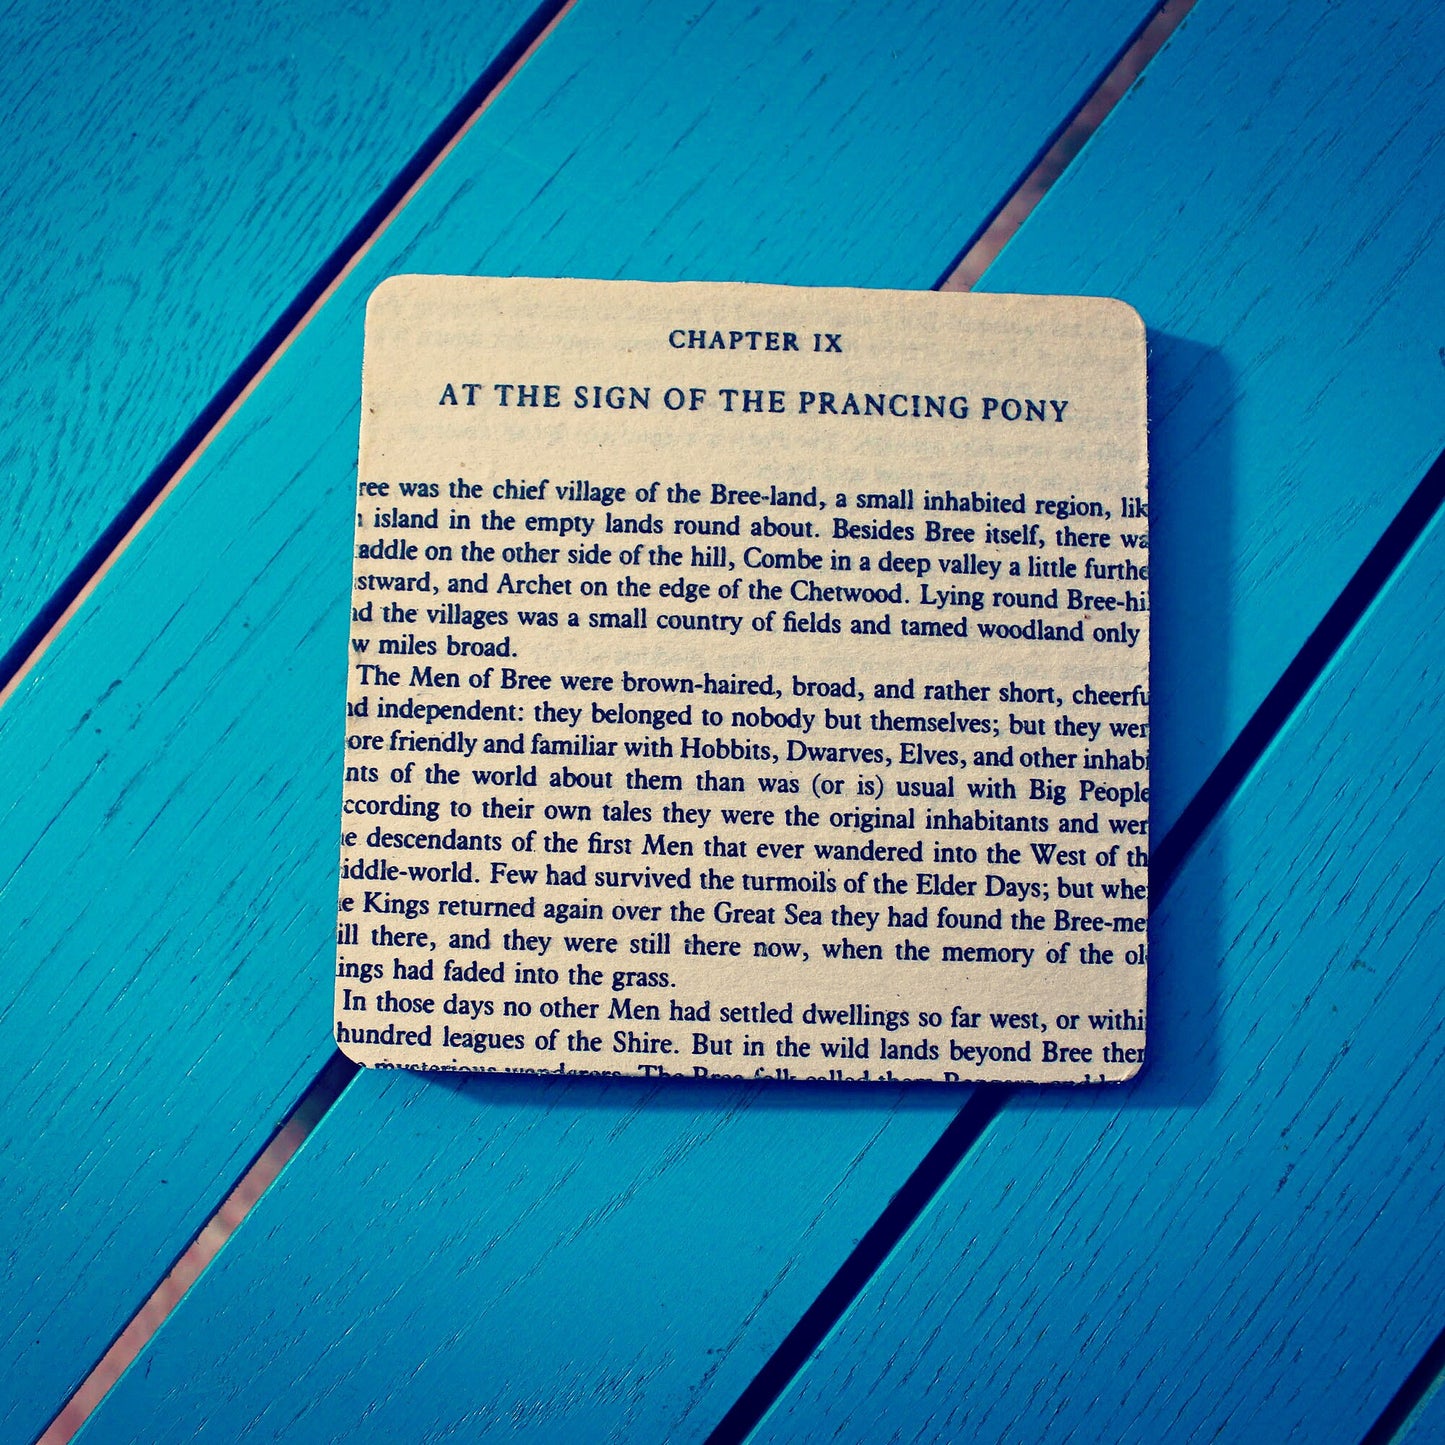 Recycled Lord of the Rings book page coasters. Vintage book gift. Literature. Frodo Samwise. Gandalf. Home office. Man Cave. Geek gift. Dad